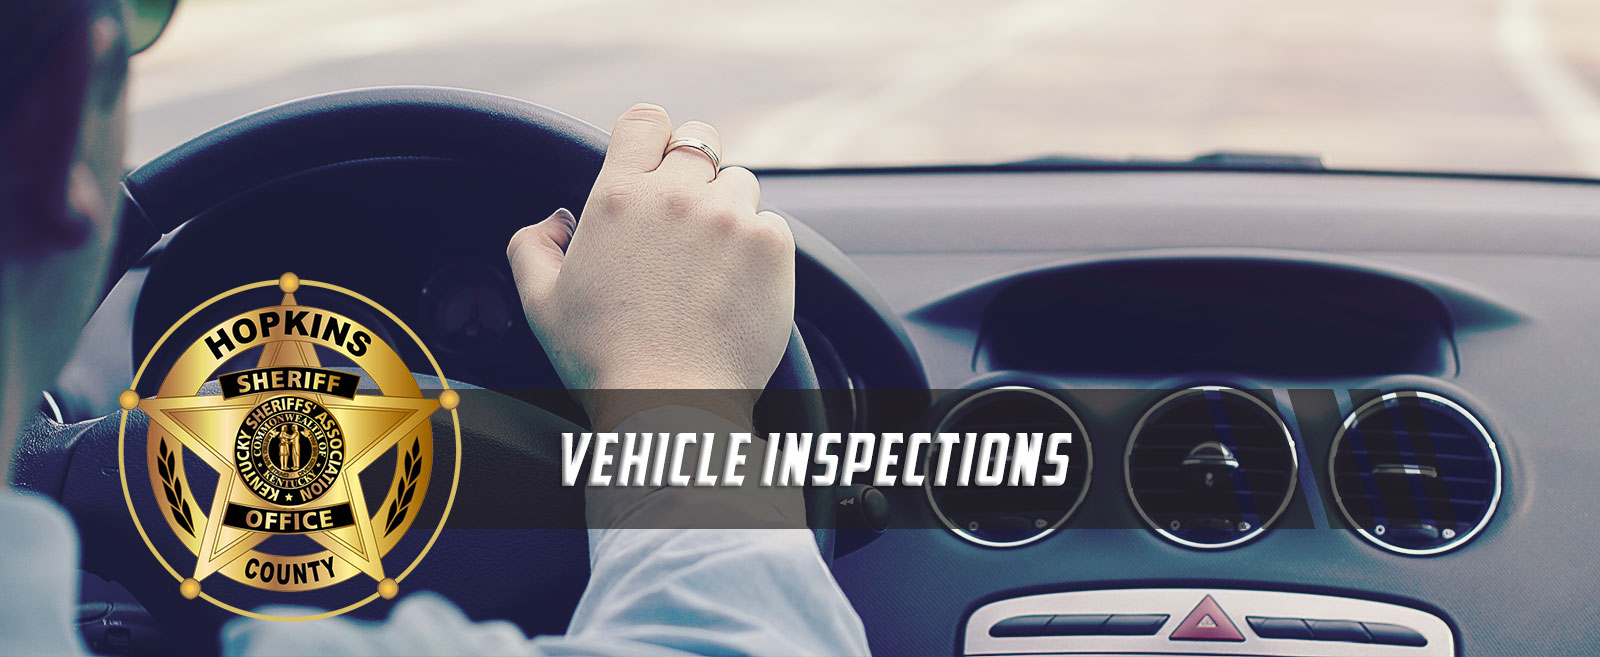 VEHICLE INSPECTIONS